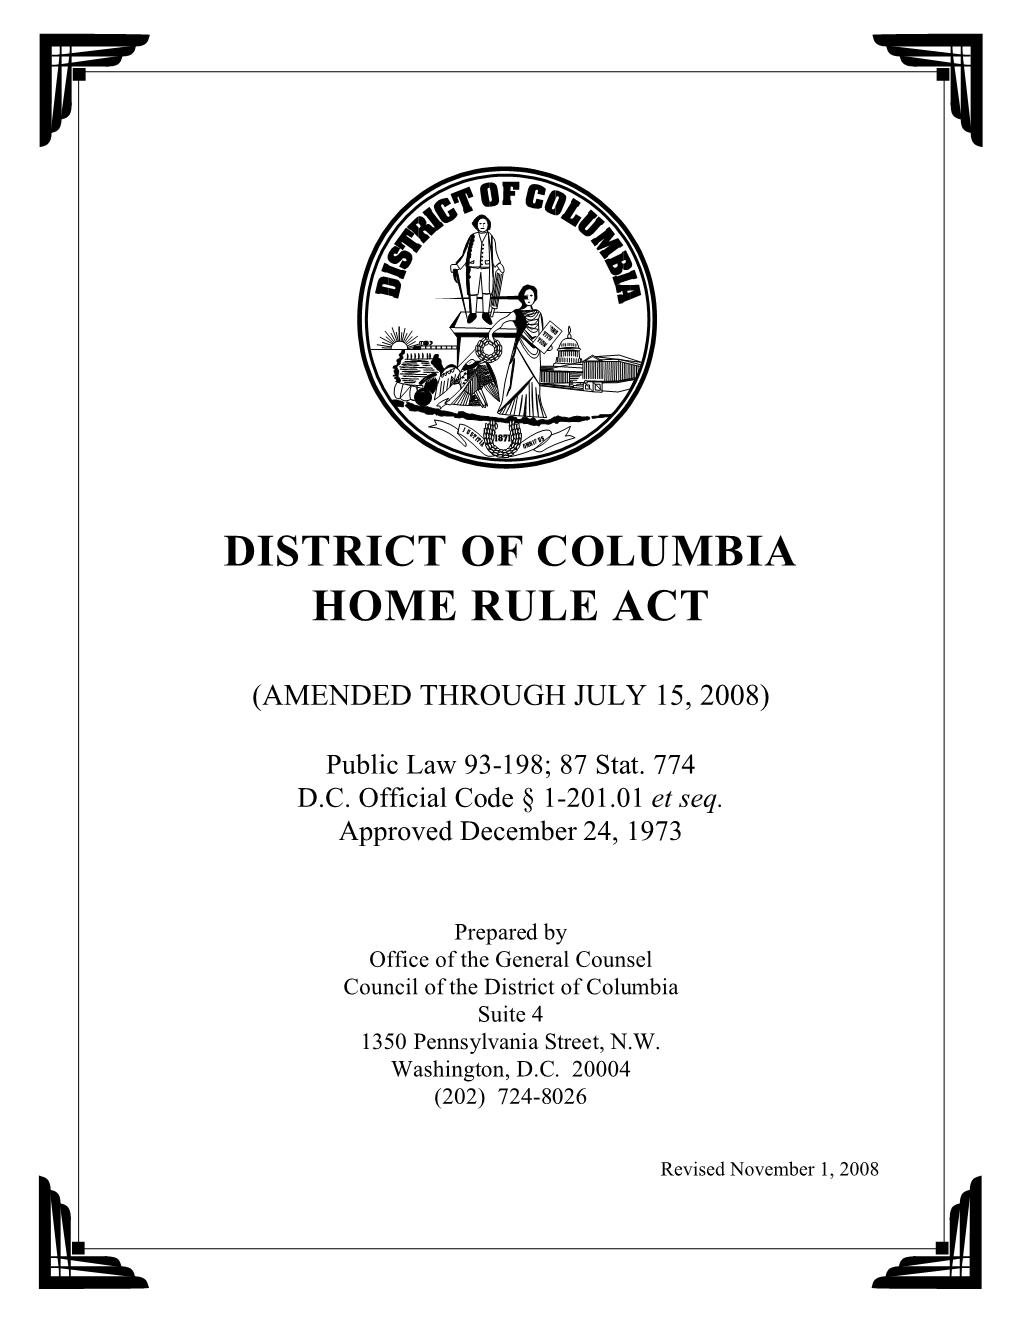 District of Columbia Home Rule Act